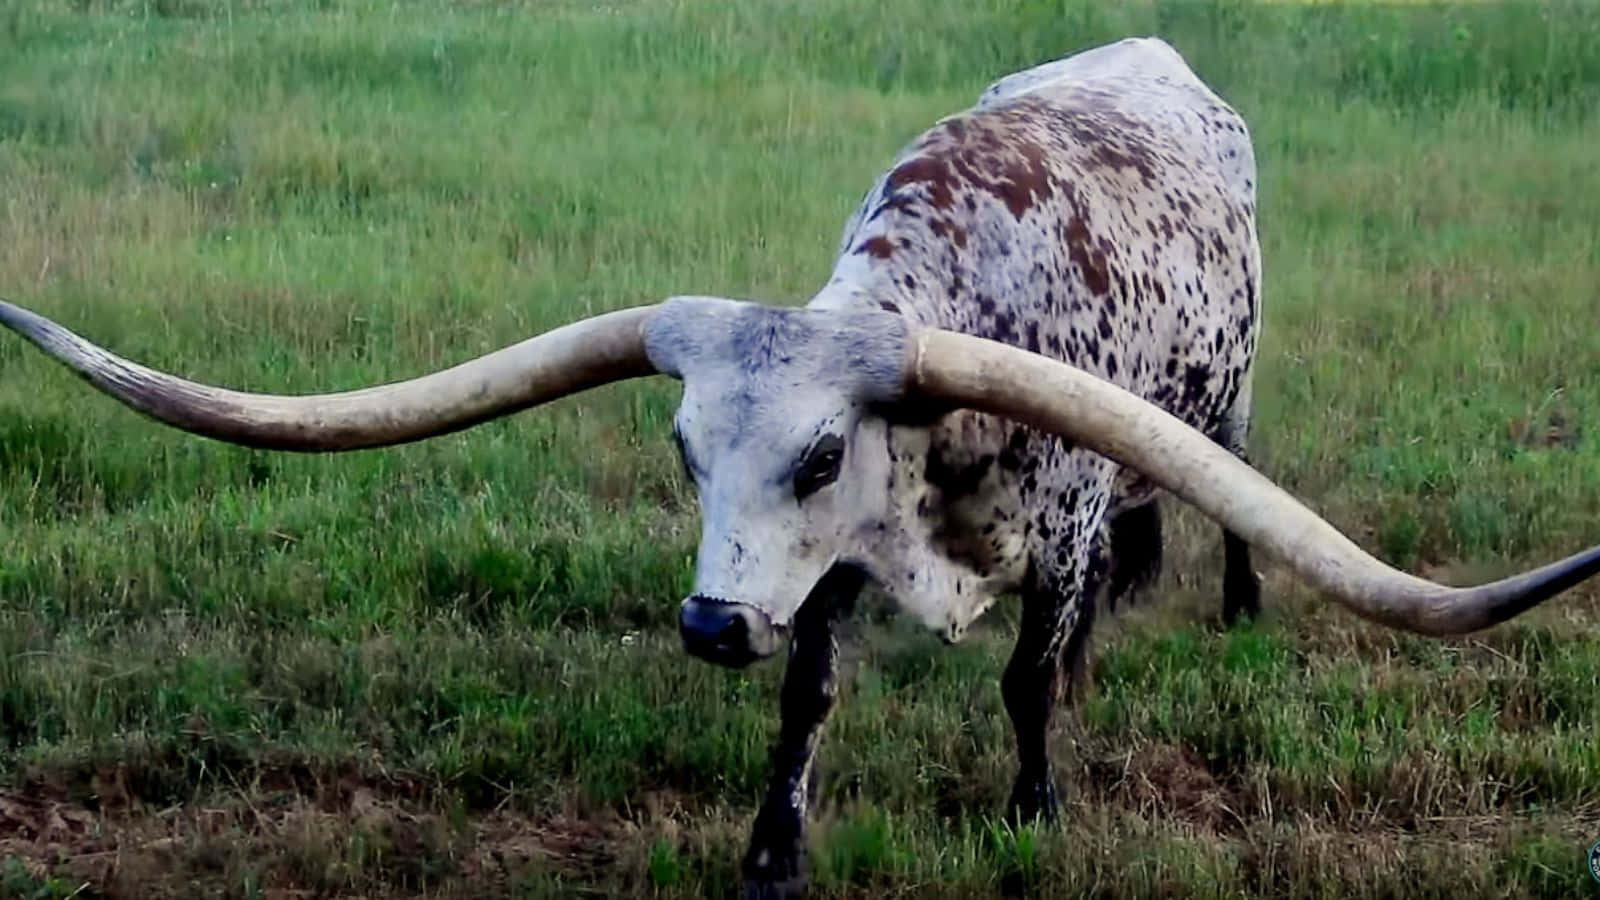 Two Longhorns facing off